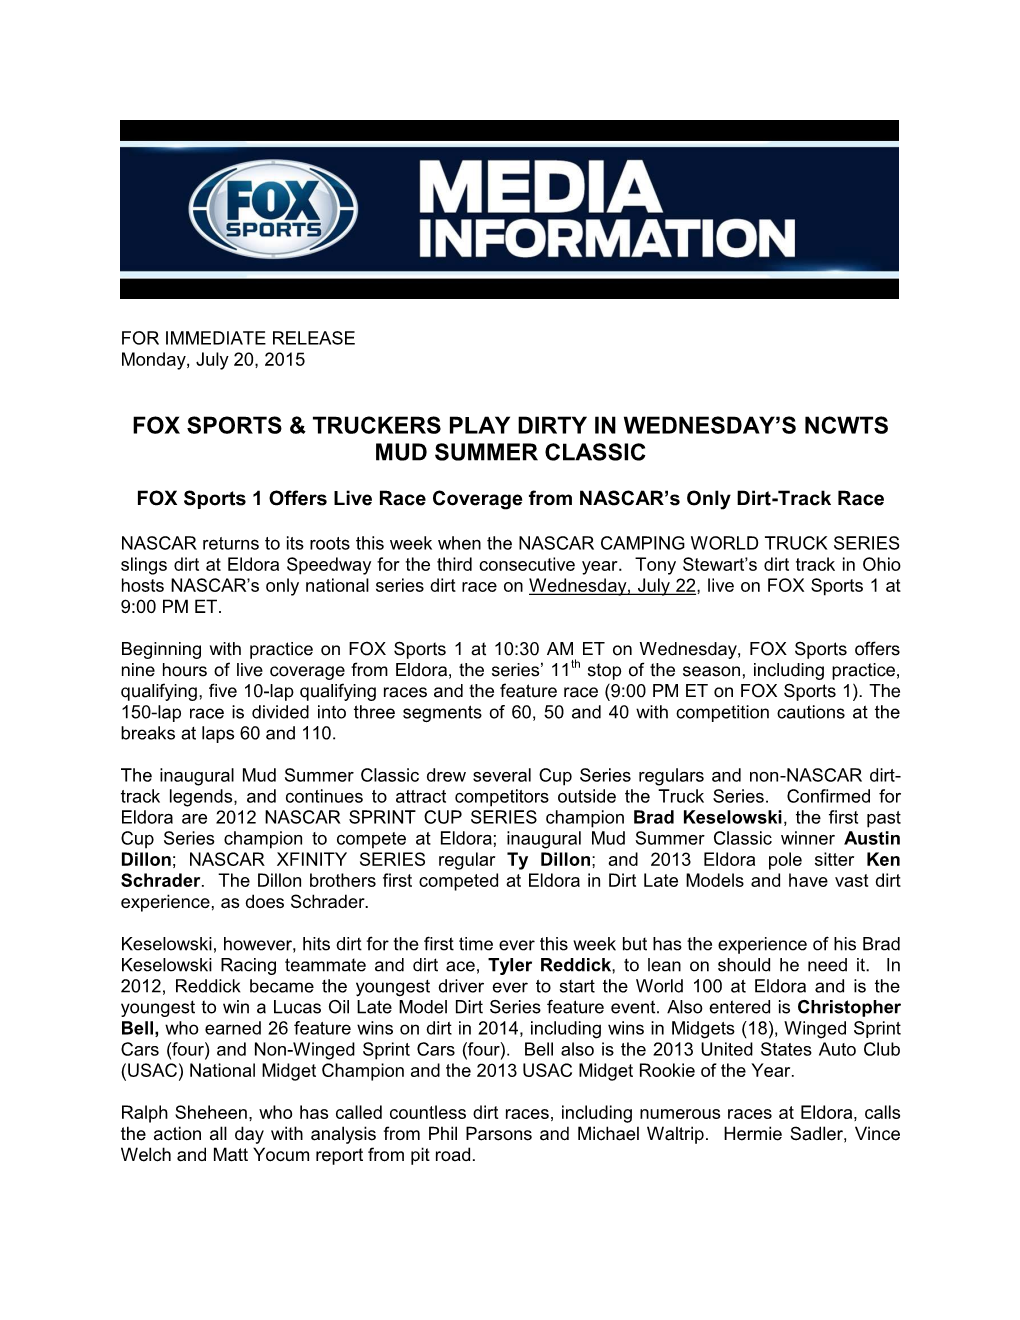 FOX Sports & Truckers Play Dirty in Wednesday's NCWTS Mud